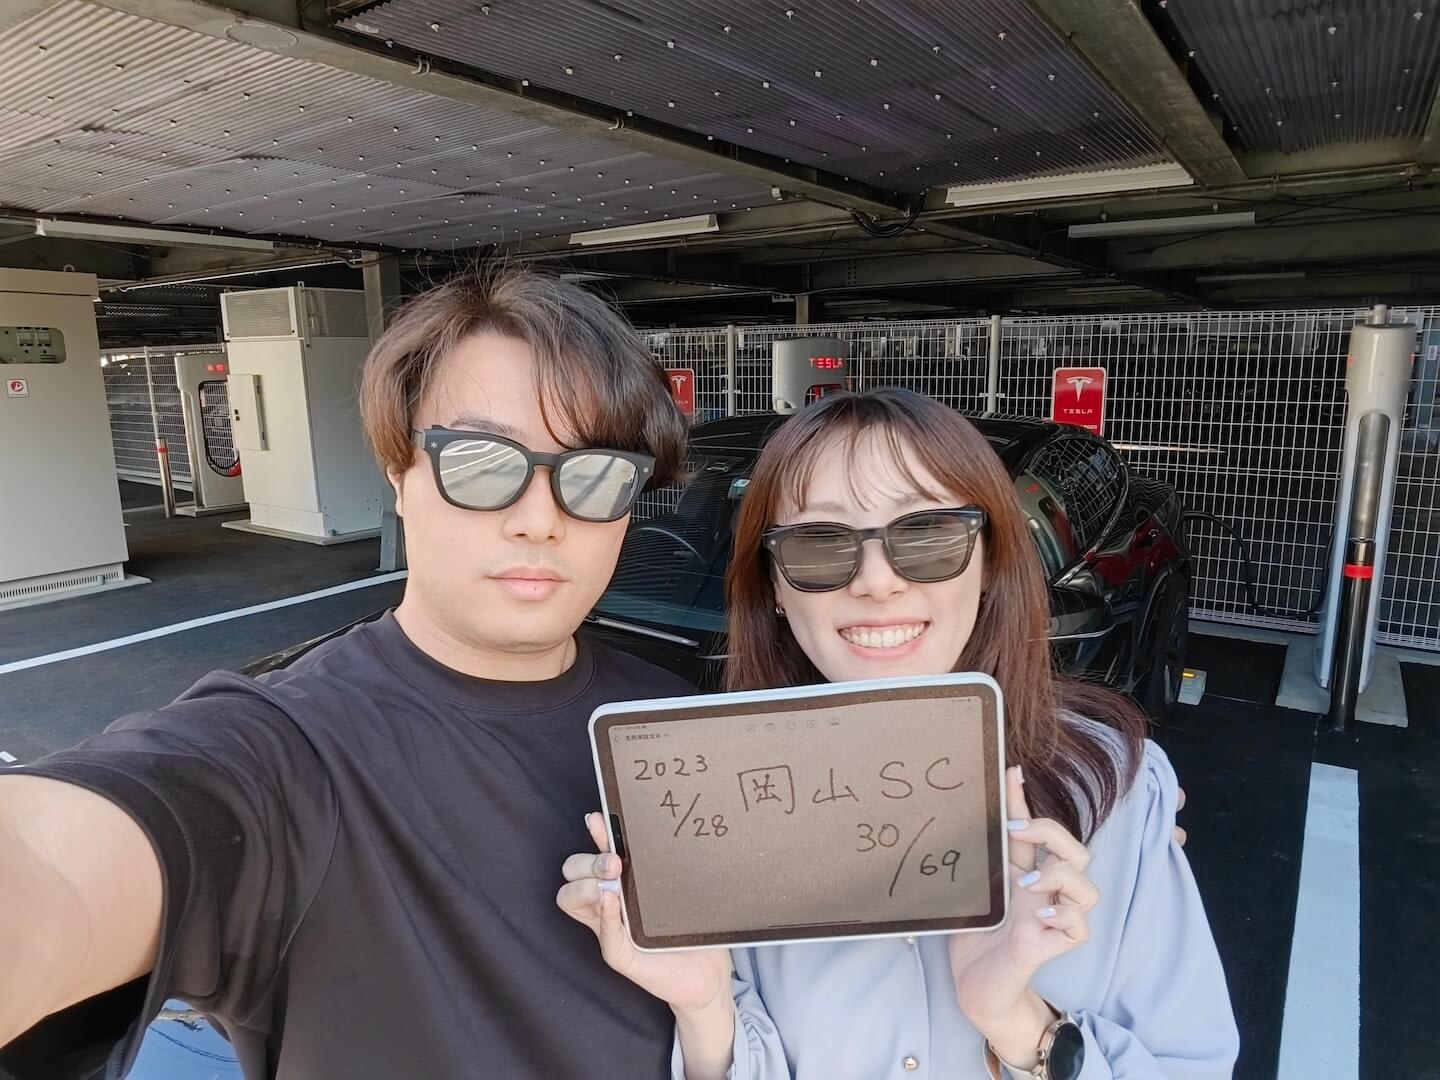 Tesla owner couple with a tablet displaying "2023/4/28 Okayama Supercharger 30/69" while charging their black Model S